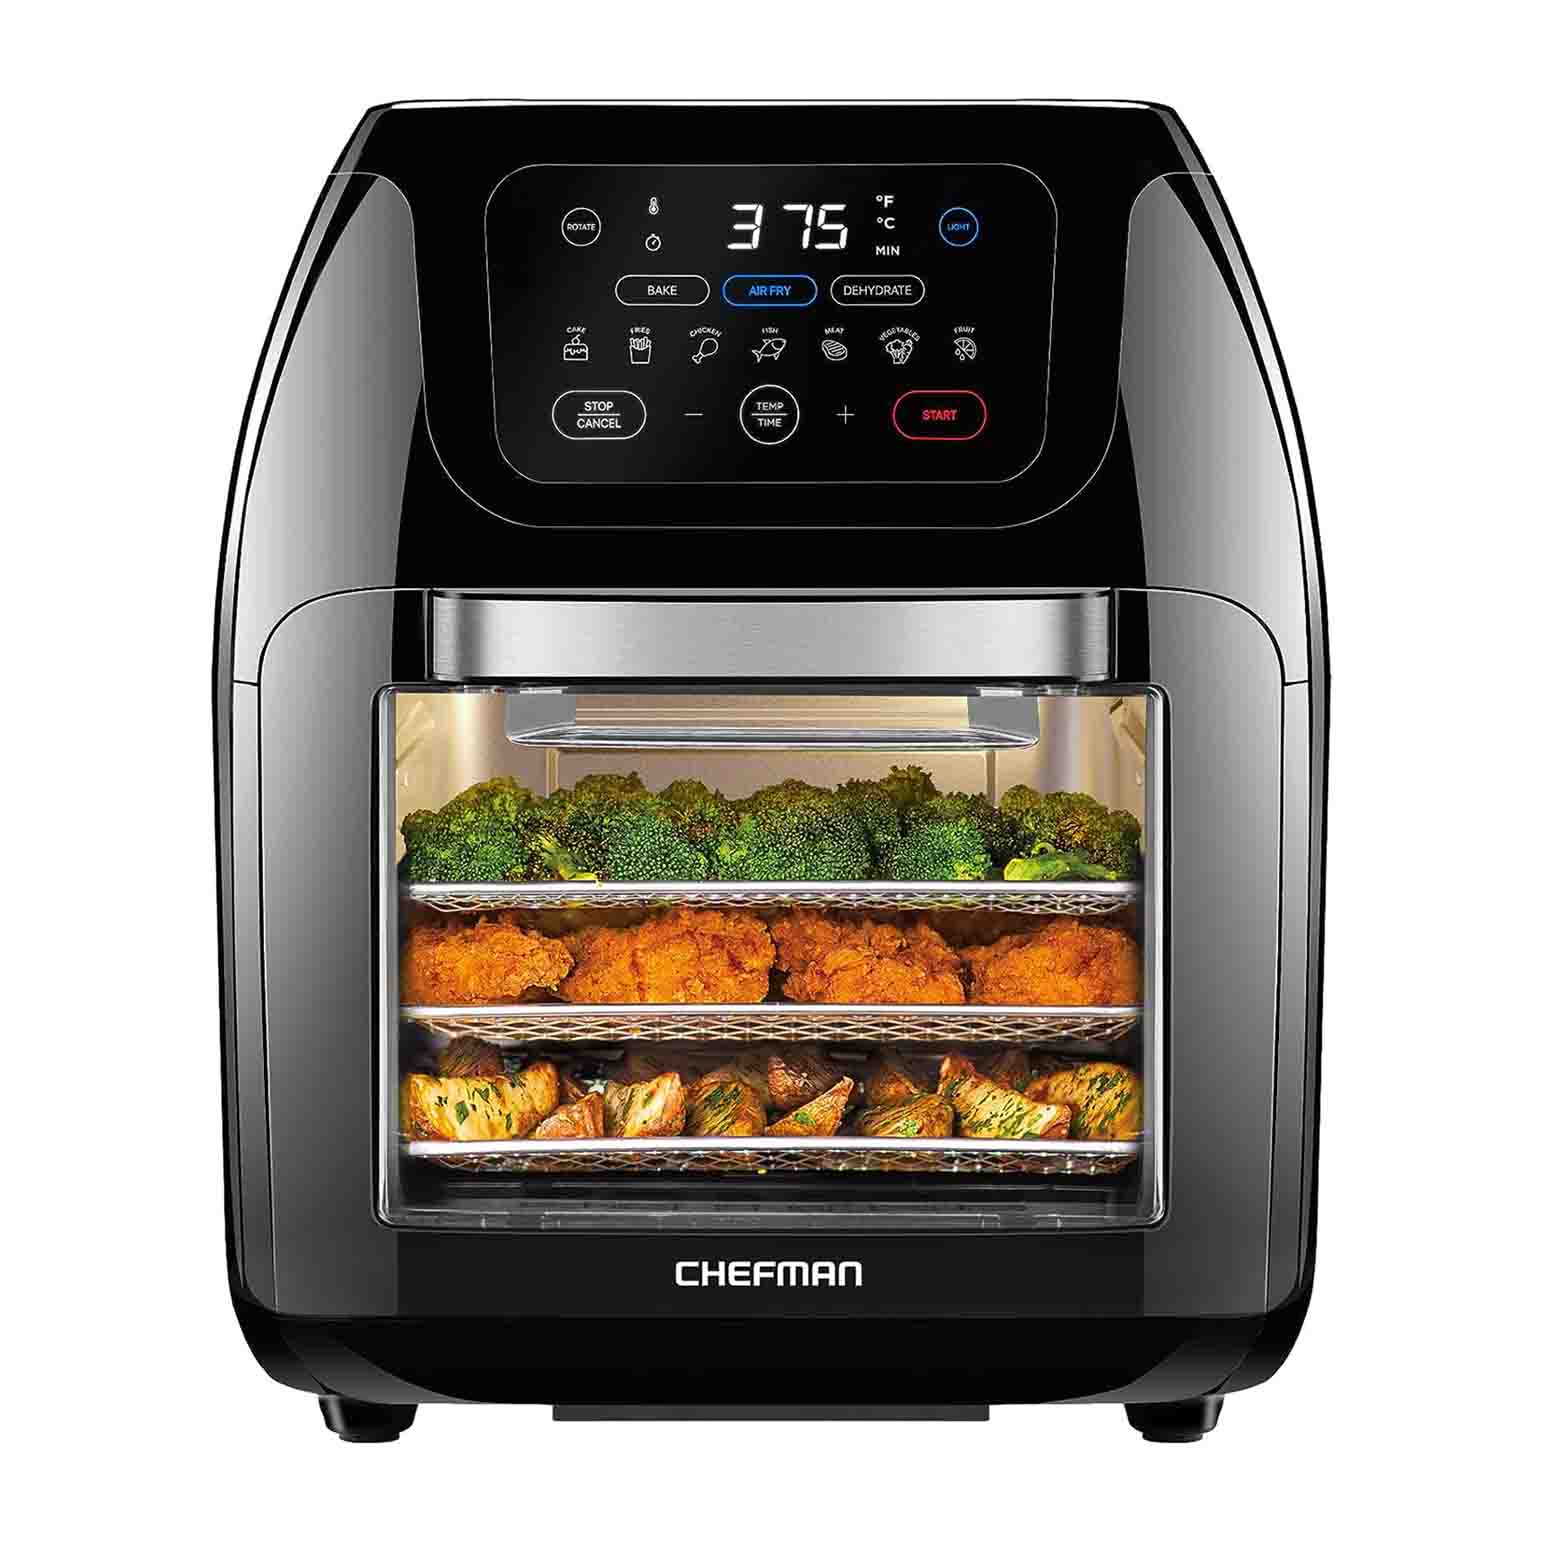 CHEFMAN Multifunctional Digital Air Fryer and Convection Oven with chicken, veg and potatoes 